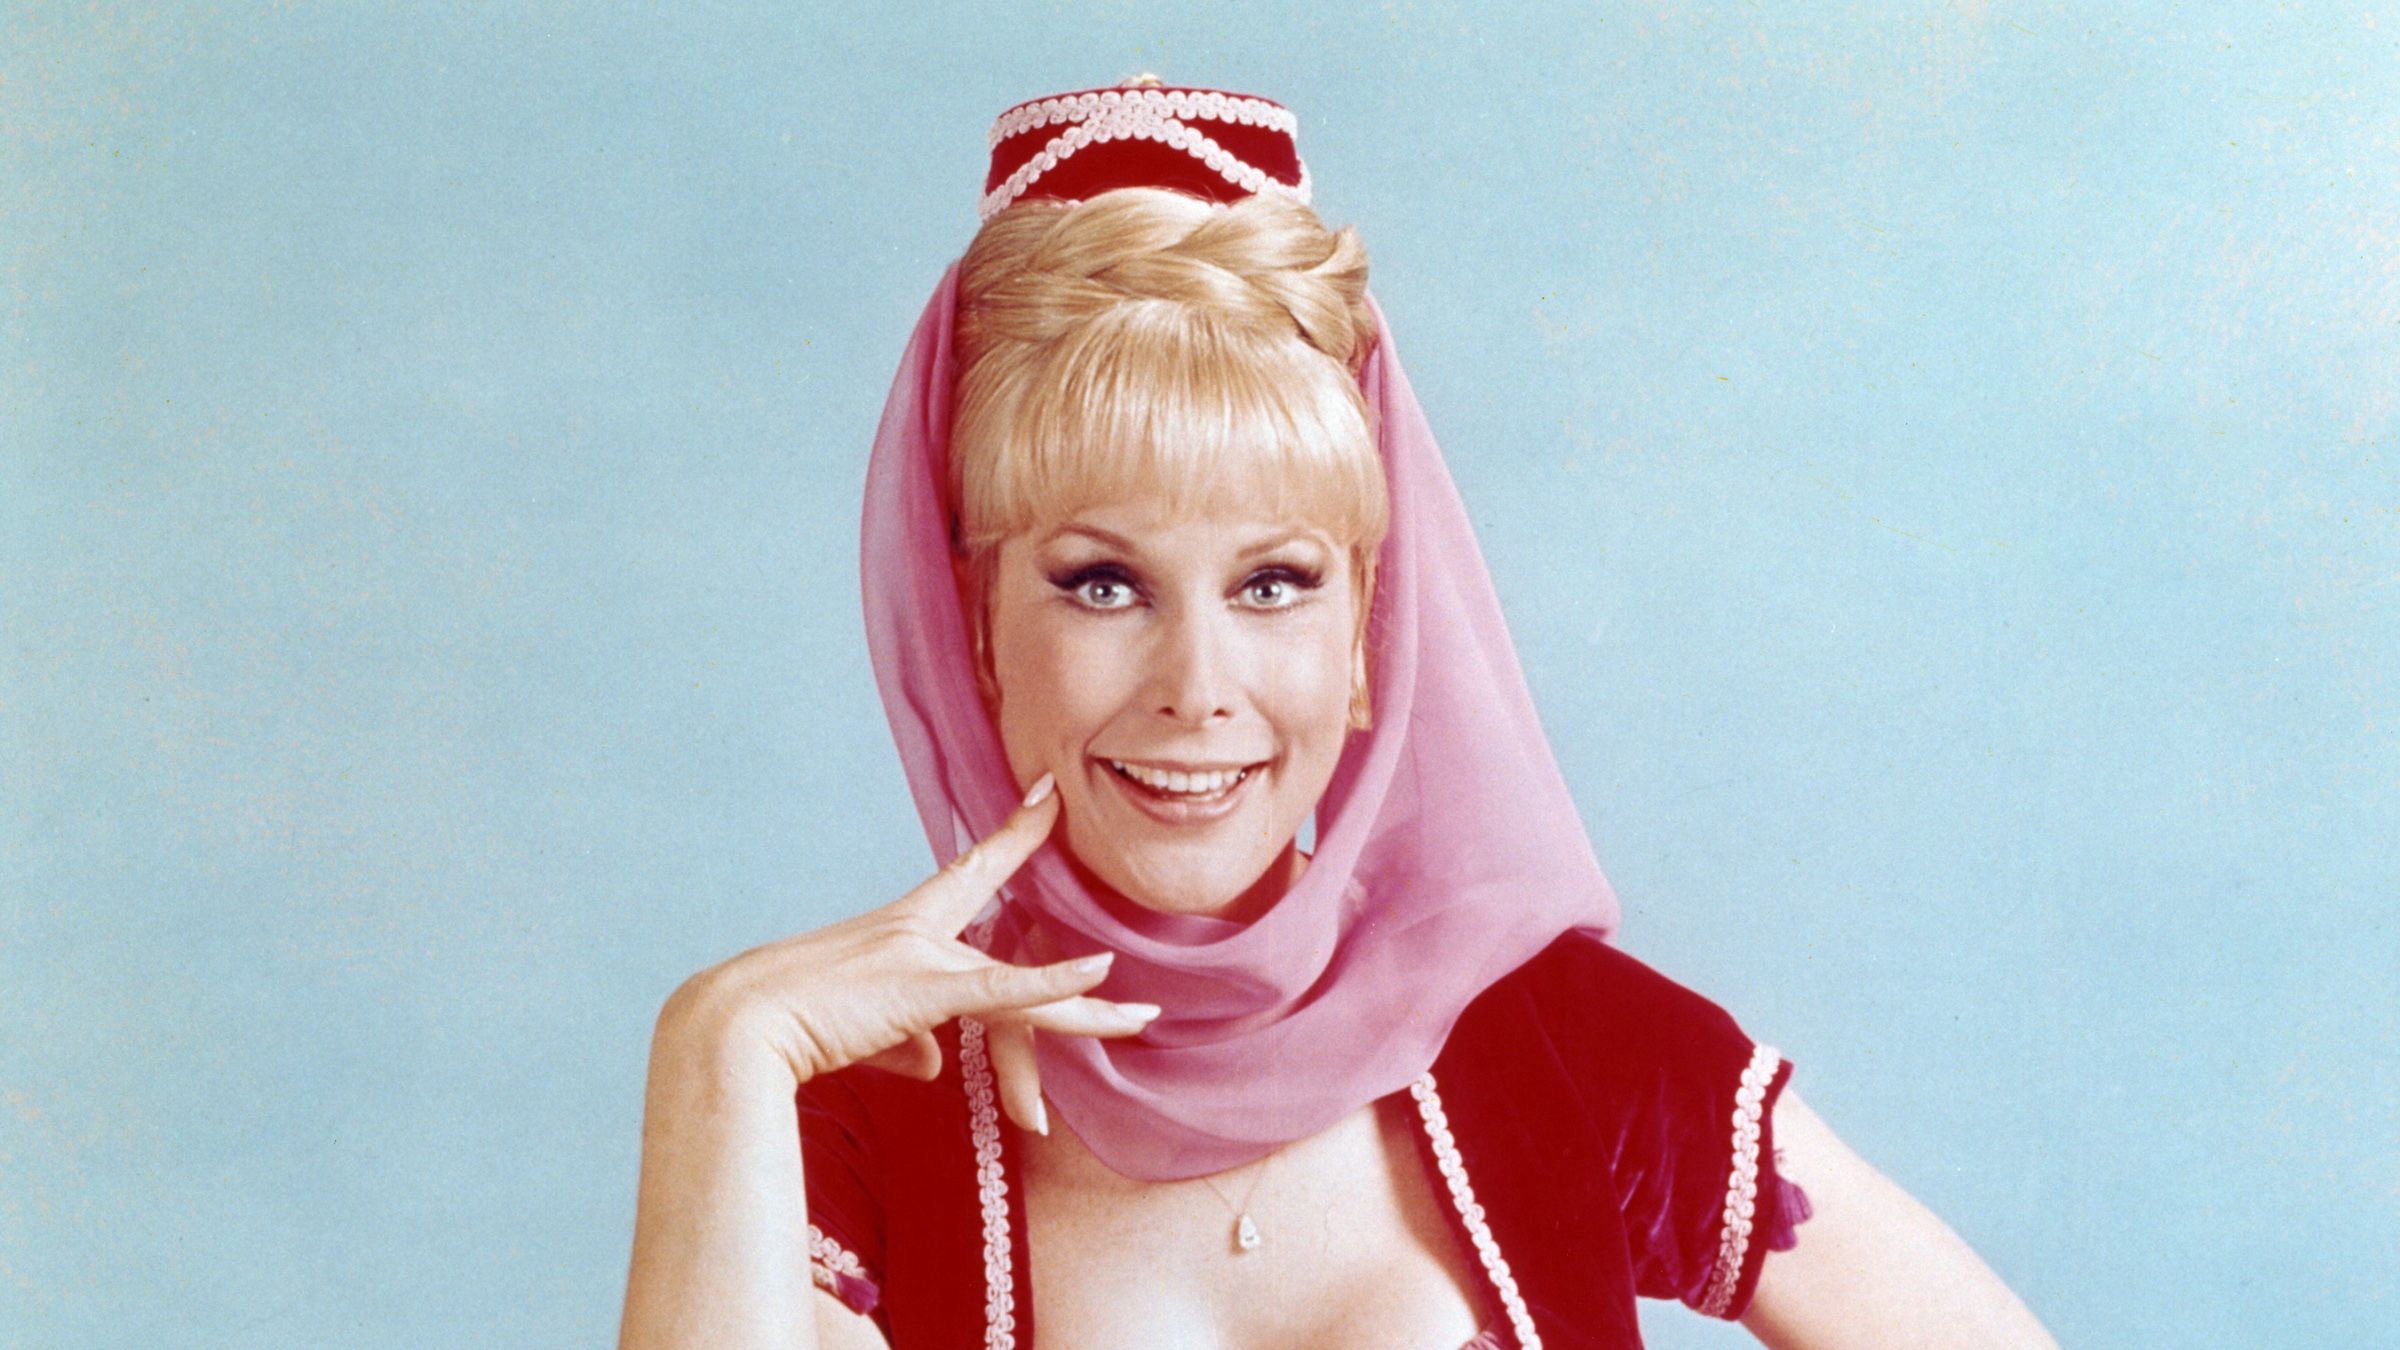 https://hips.hearstapps.com/hmg-prod/images/barbara-eden-us-actress-in-costume-sitting-on-a-multi-news-photo-1692912691.jpg?crop=1xw:0.45xh;center,top